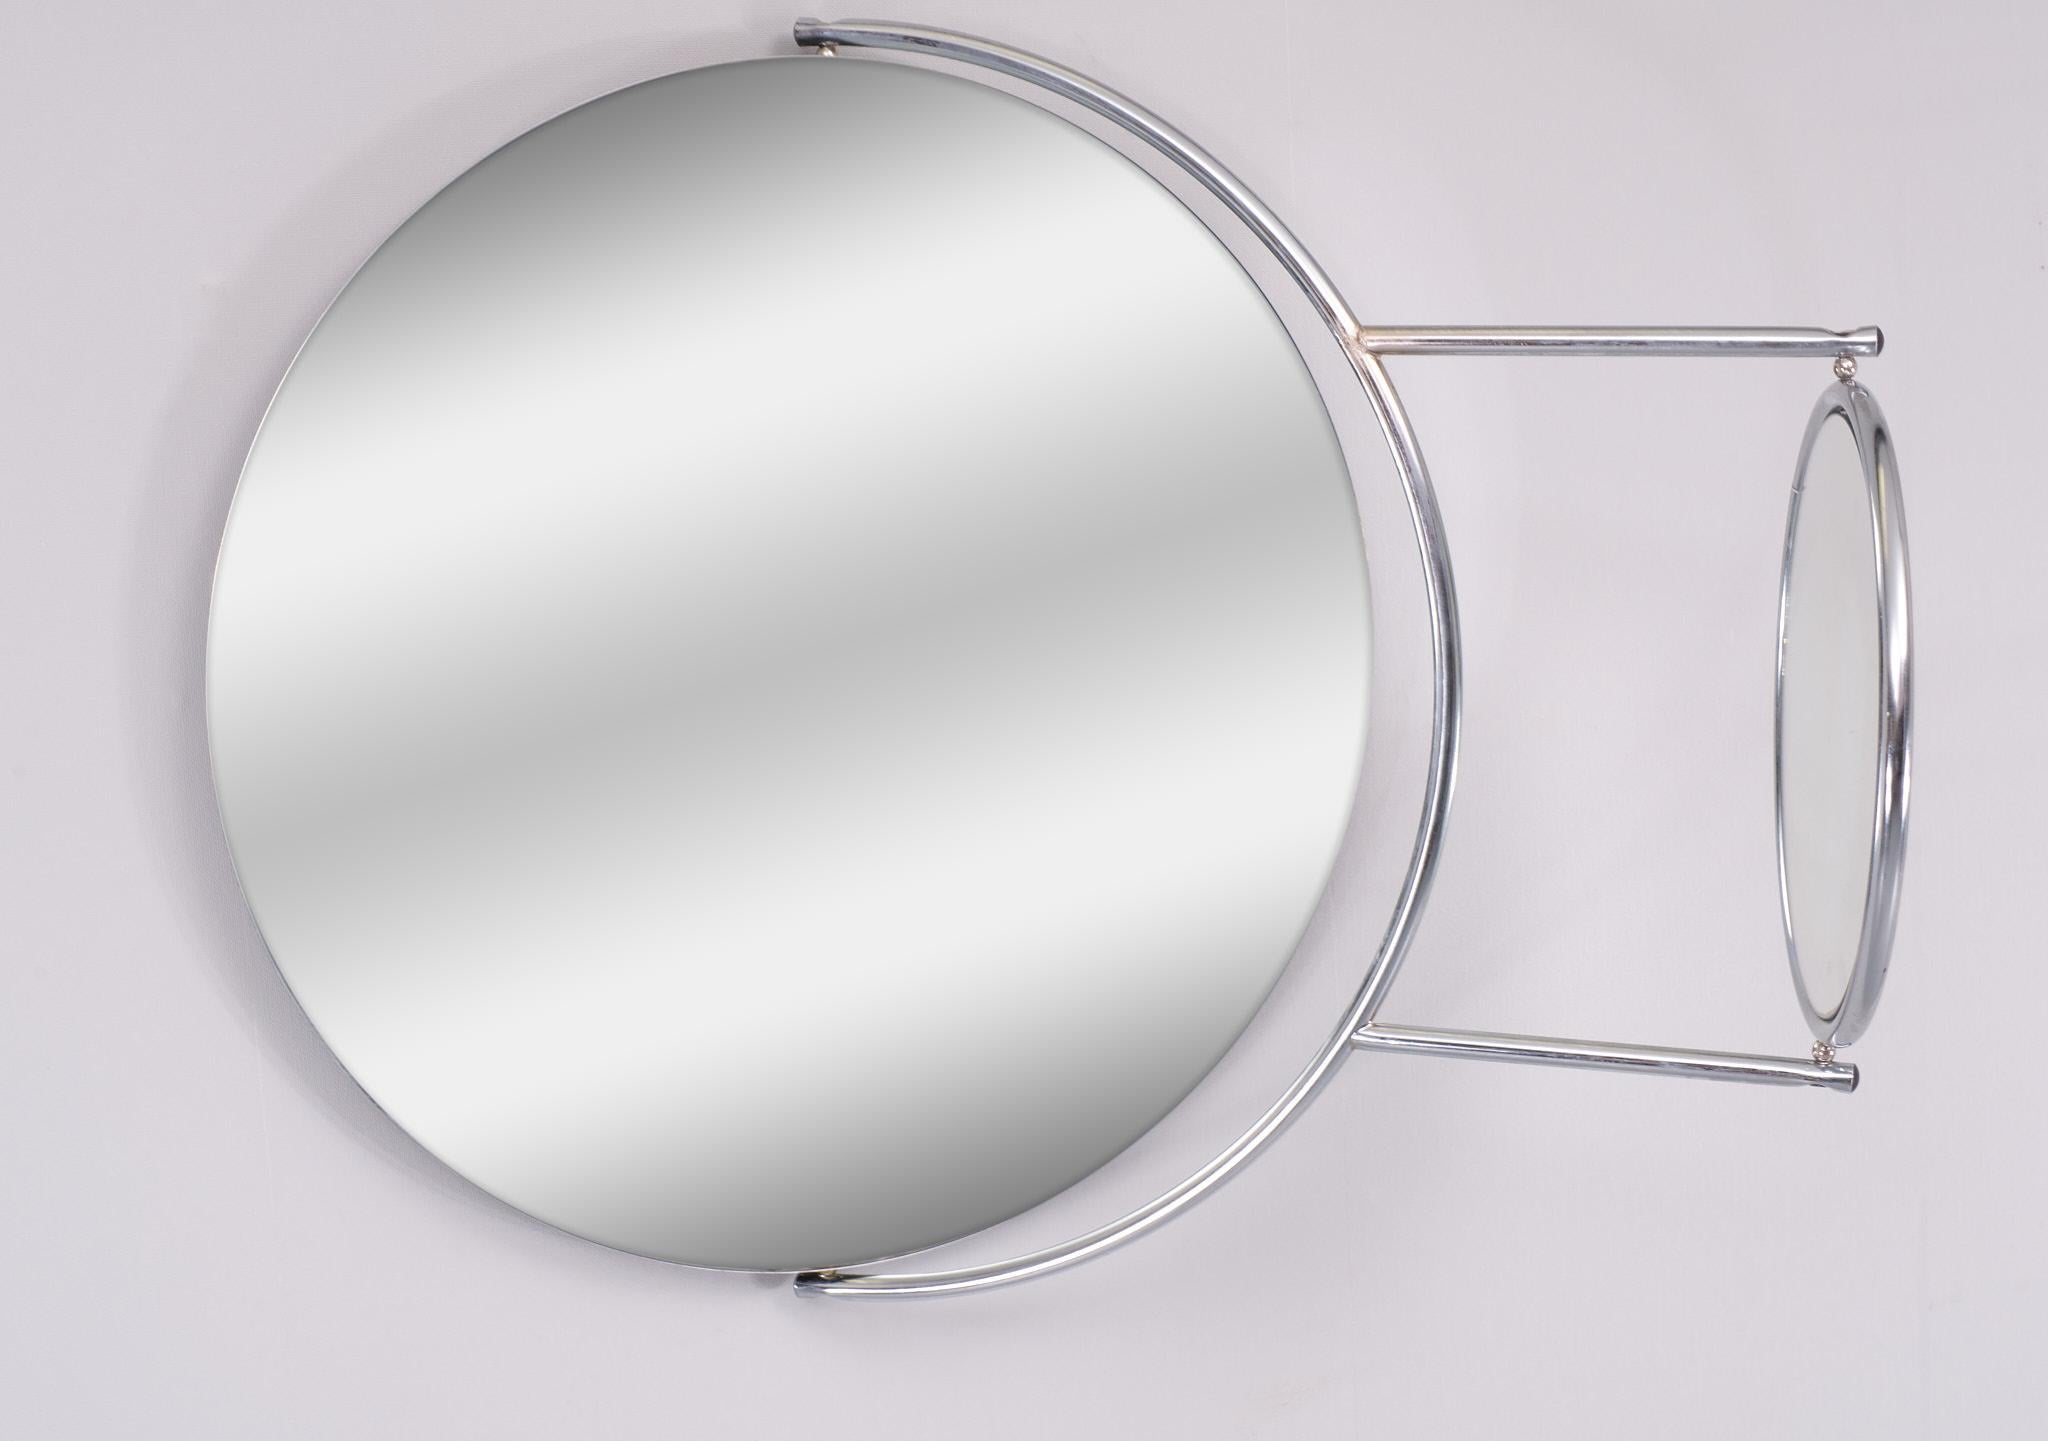 Double Mirror with articulating swivel arm Bieffeplast  1980s Italy  For Sale 1